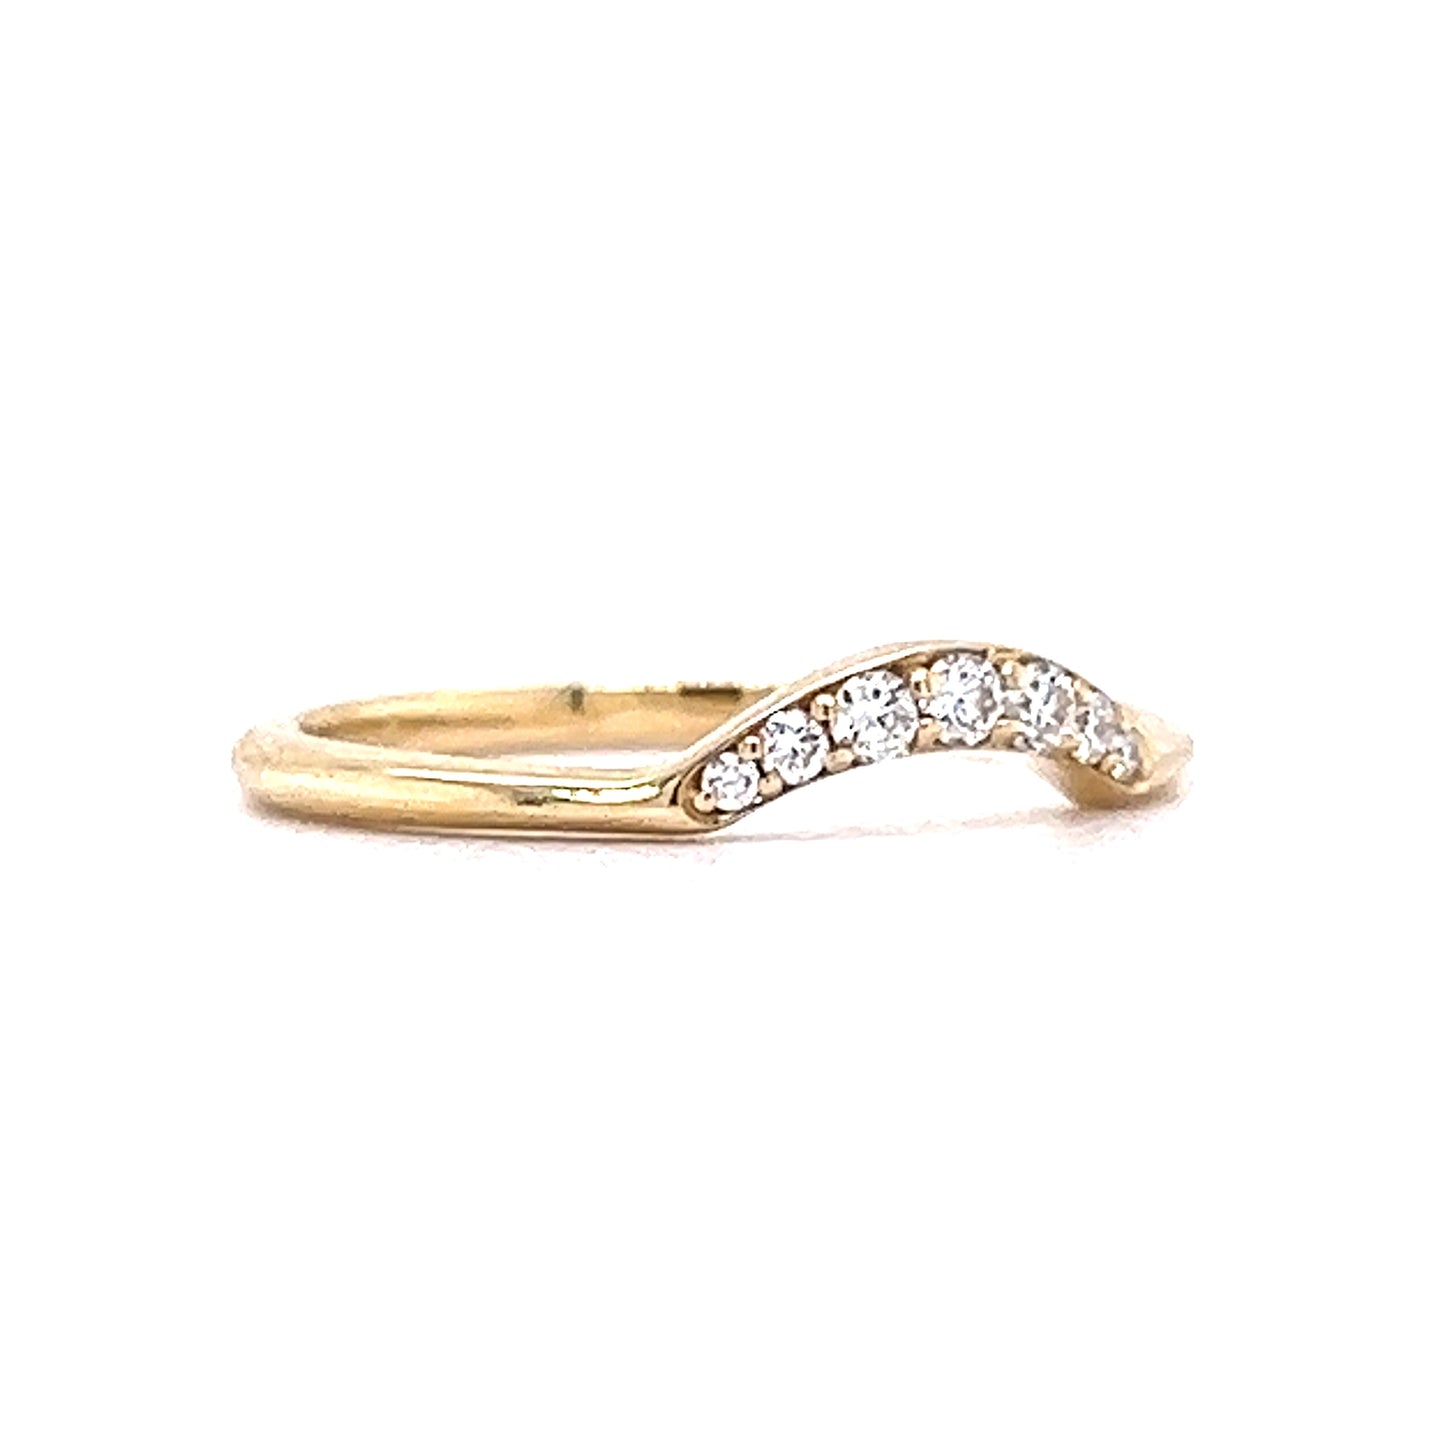 .06 Round Brilliant Diamond Curved Wedding Band in 14k Yellow Gold